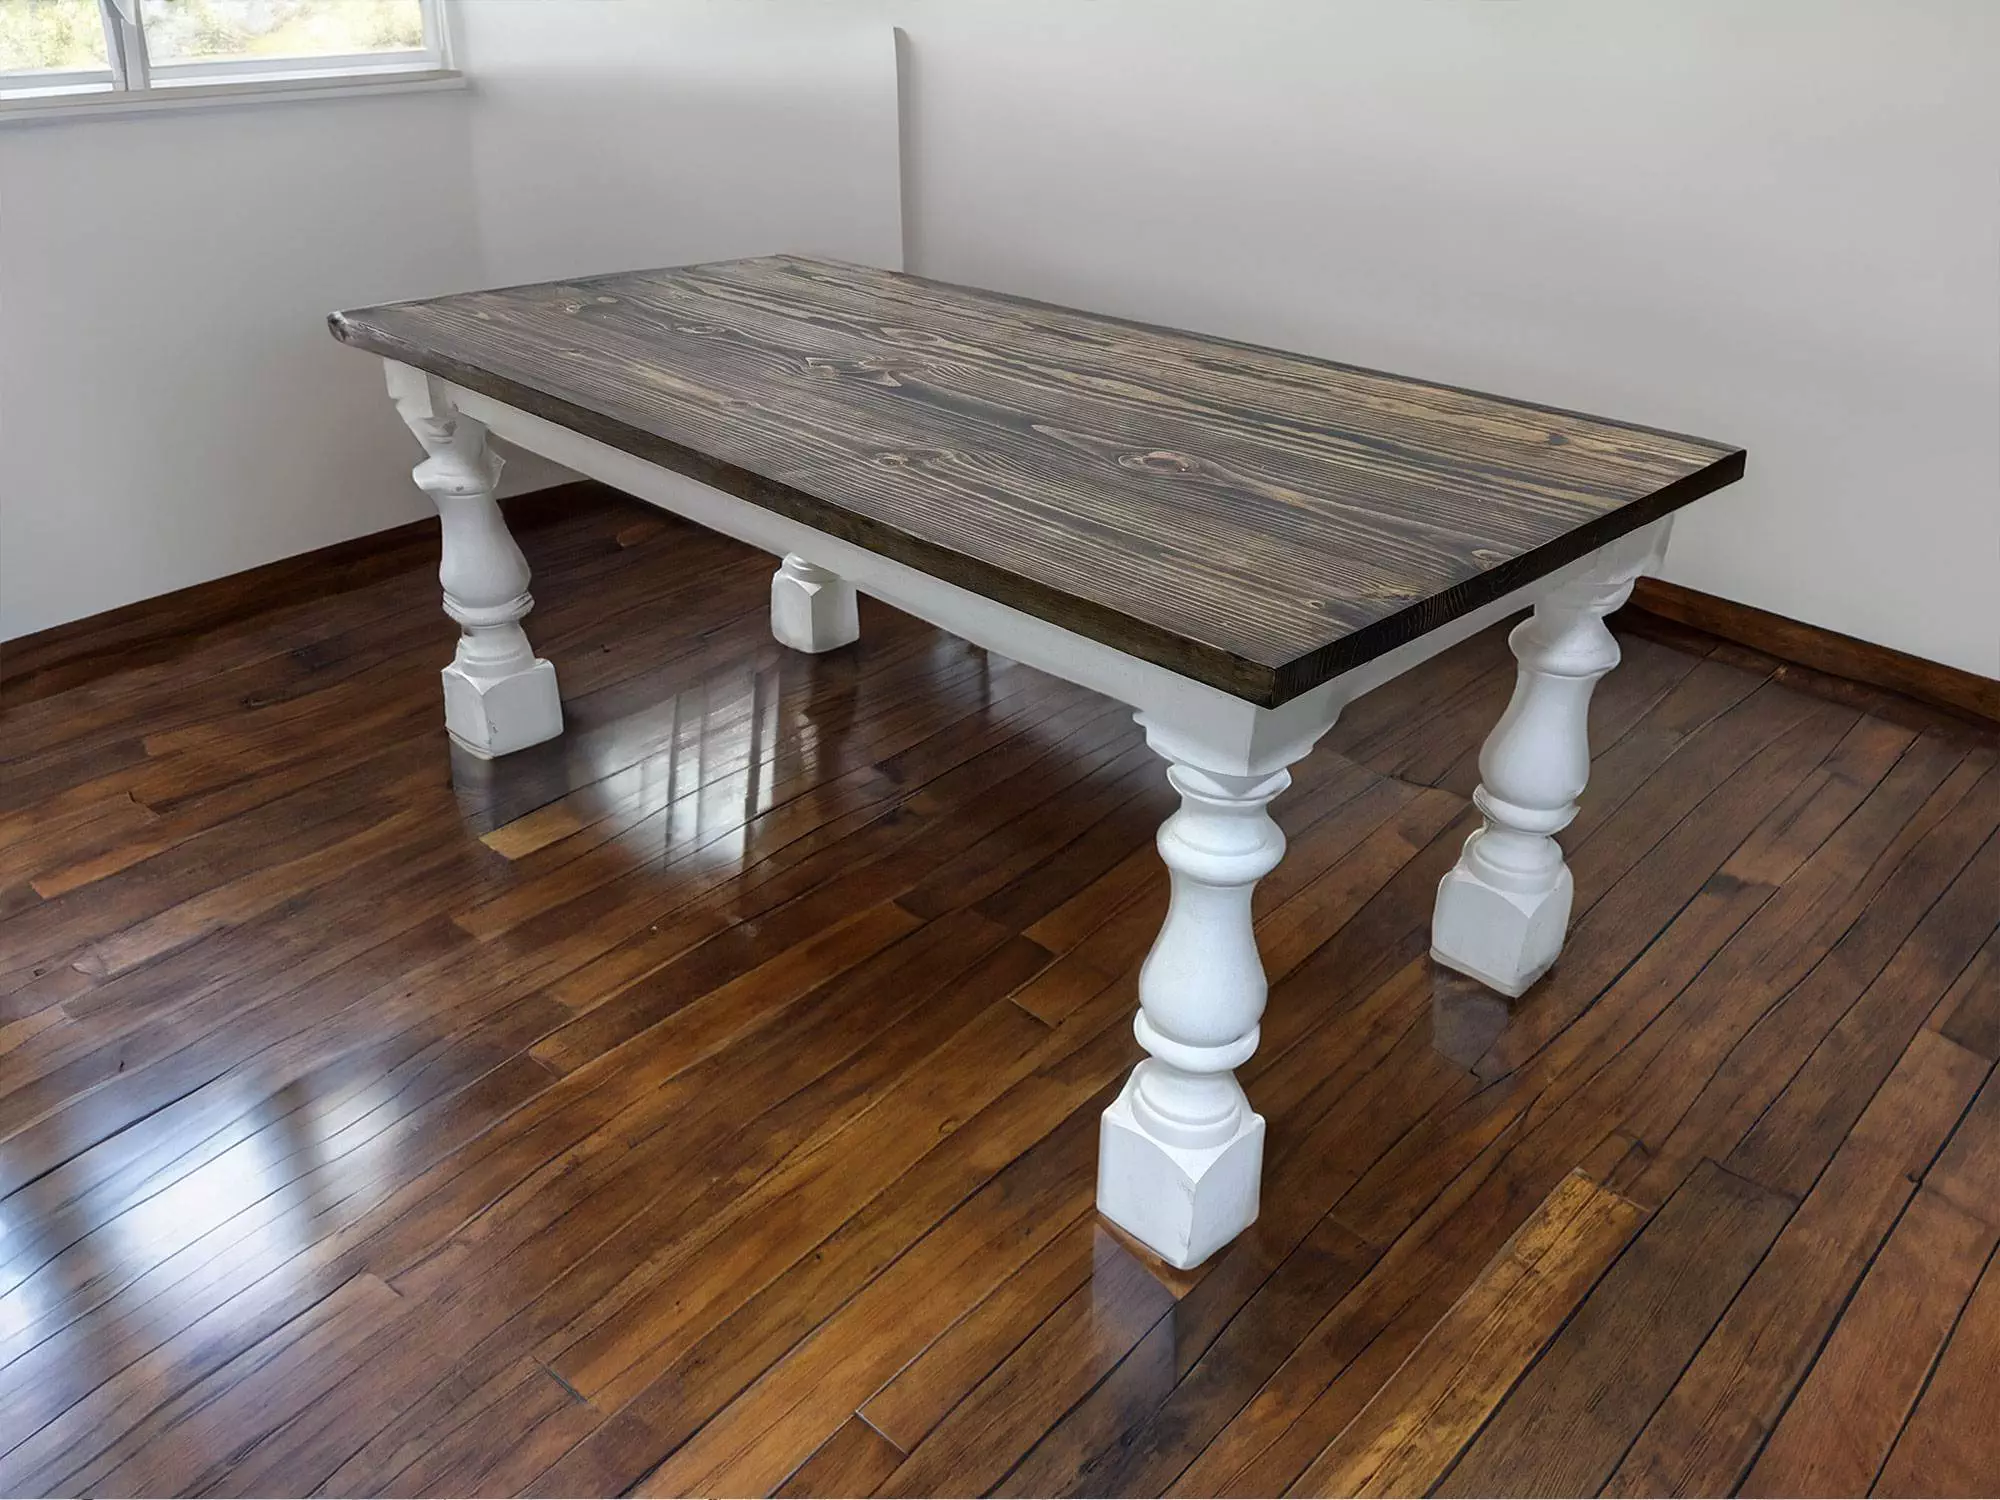 Monastery Leg Farmhouse Dining Room Table made in Solid Wood